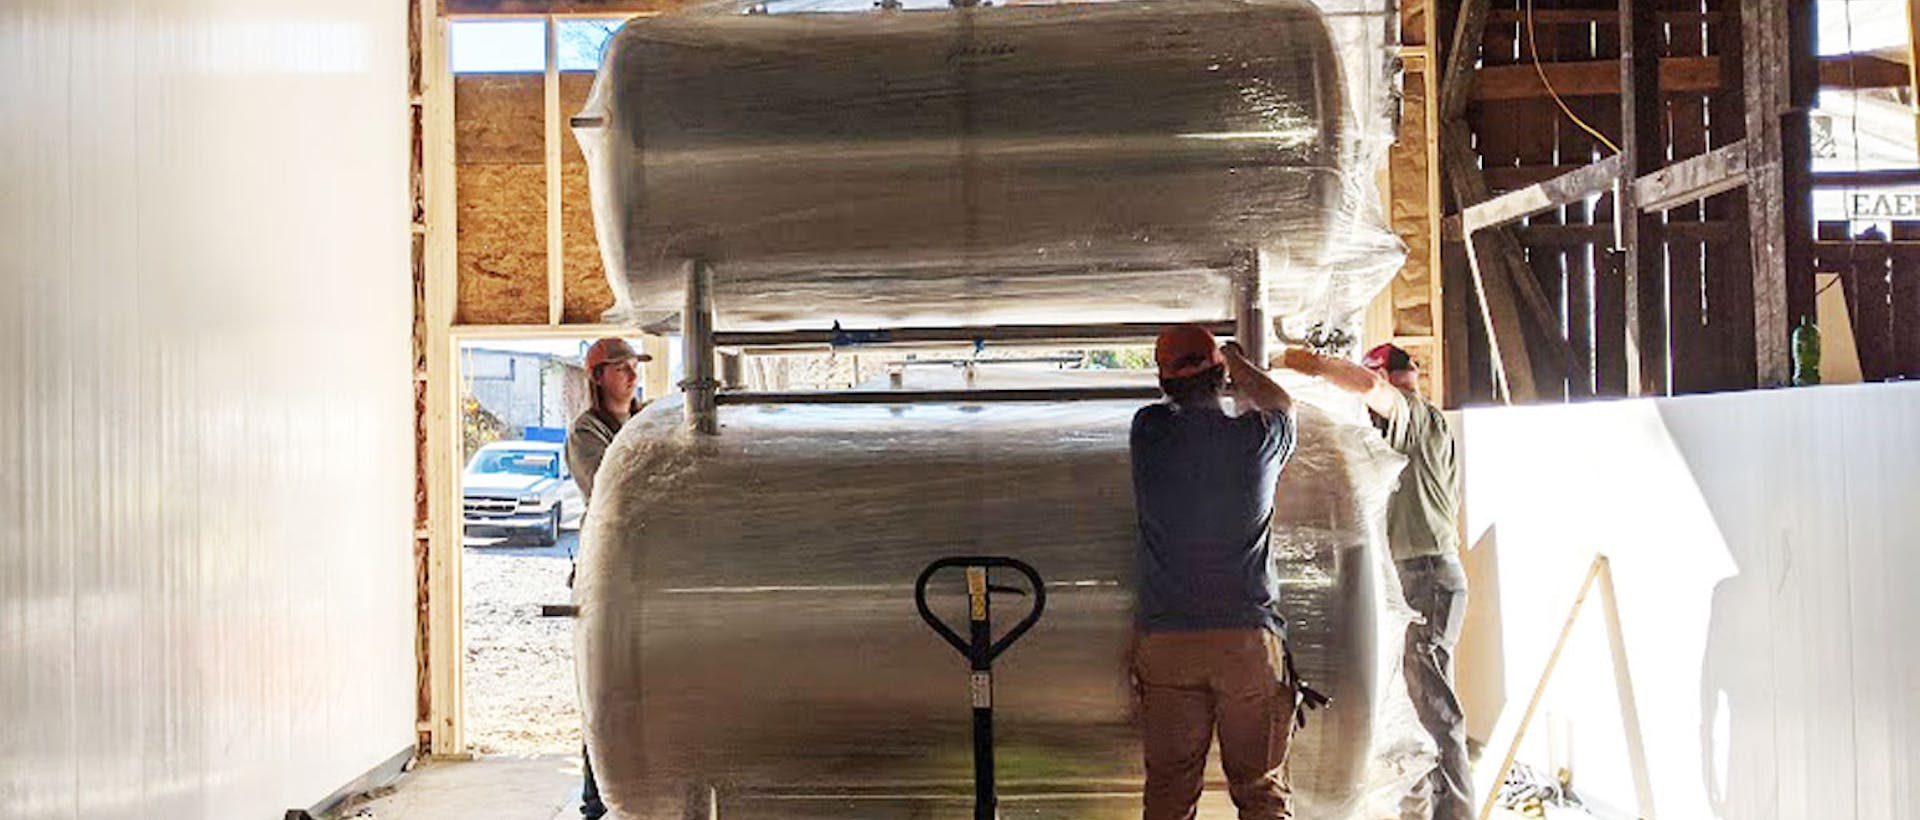 Loading new tanks in the brewery